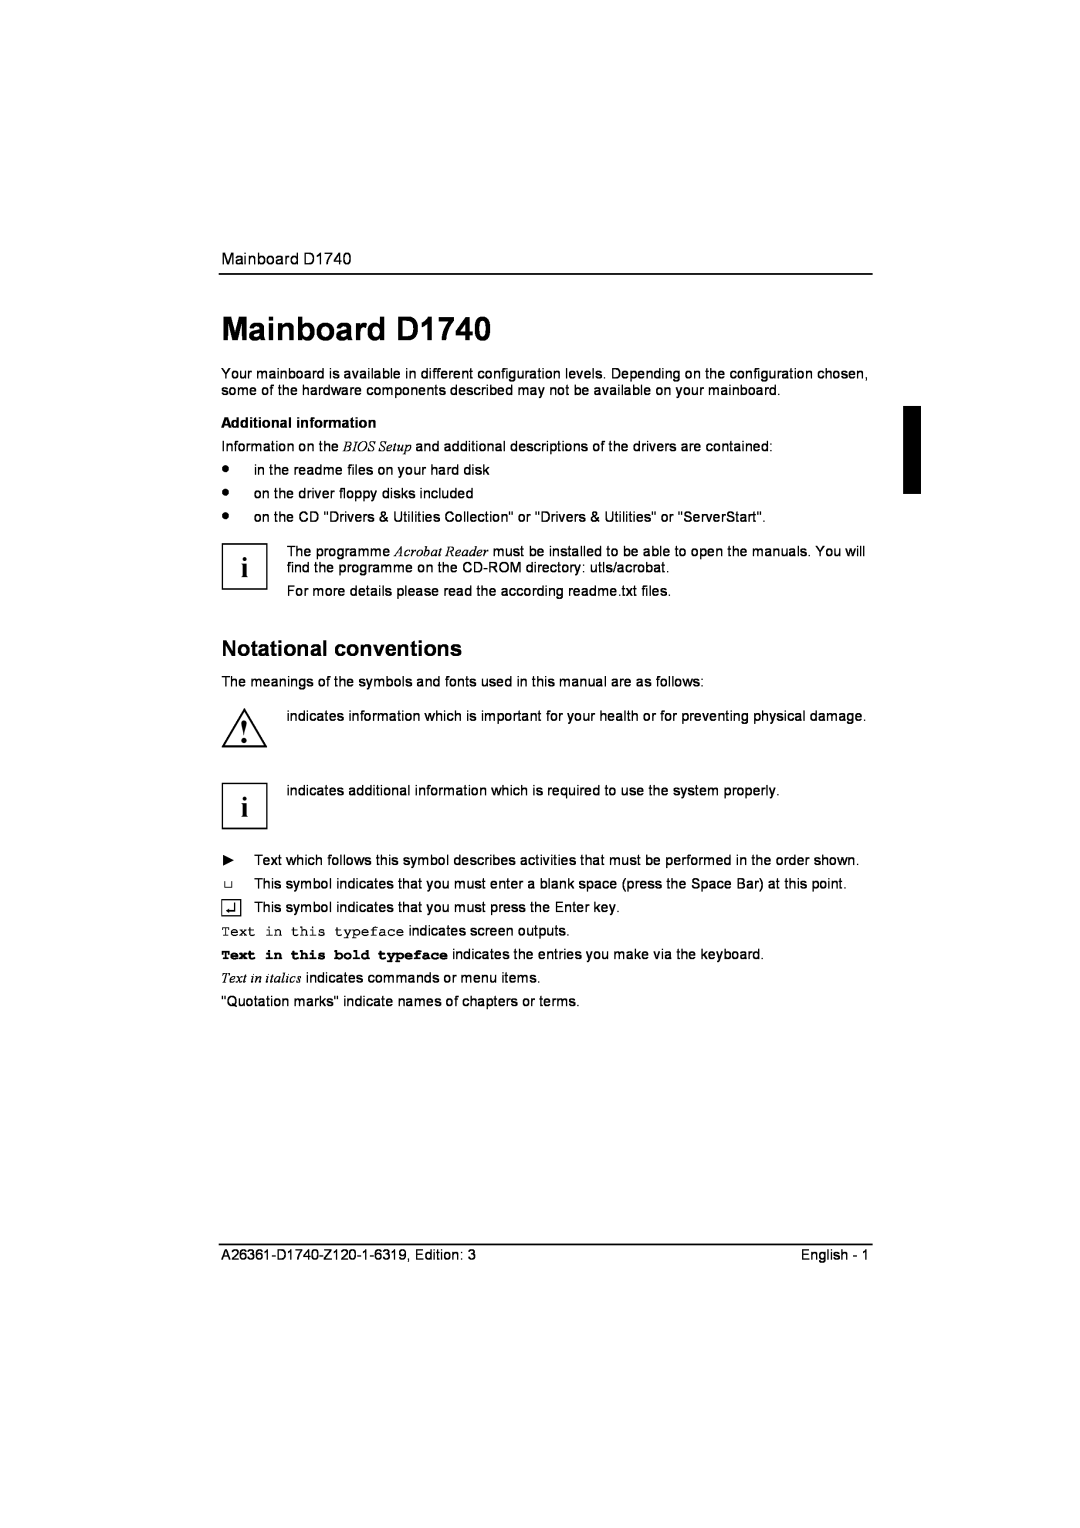 Fujitsu technical manual Notational conventions, Mainboard D1740, Additional information 